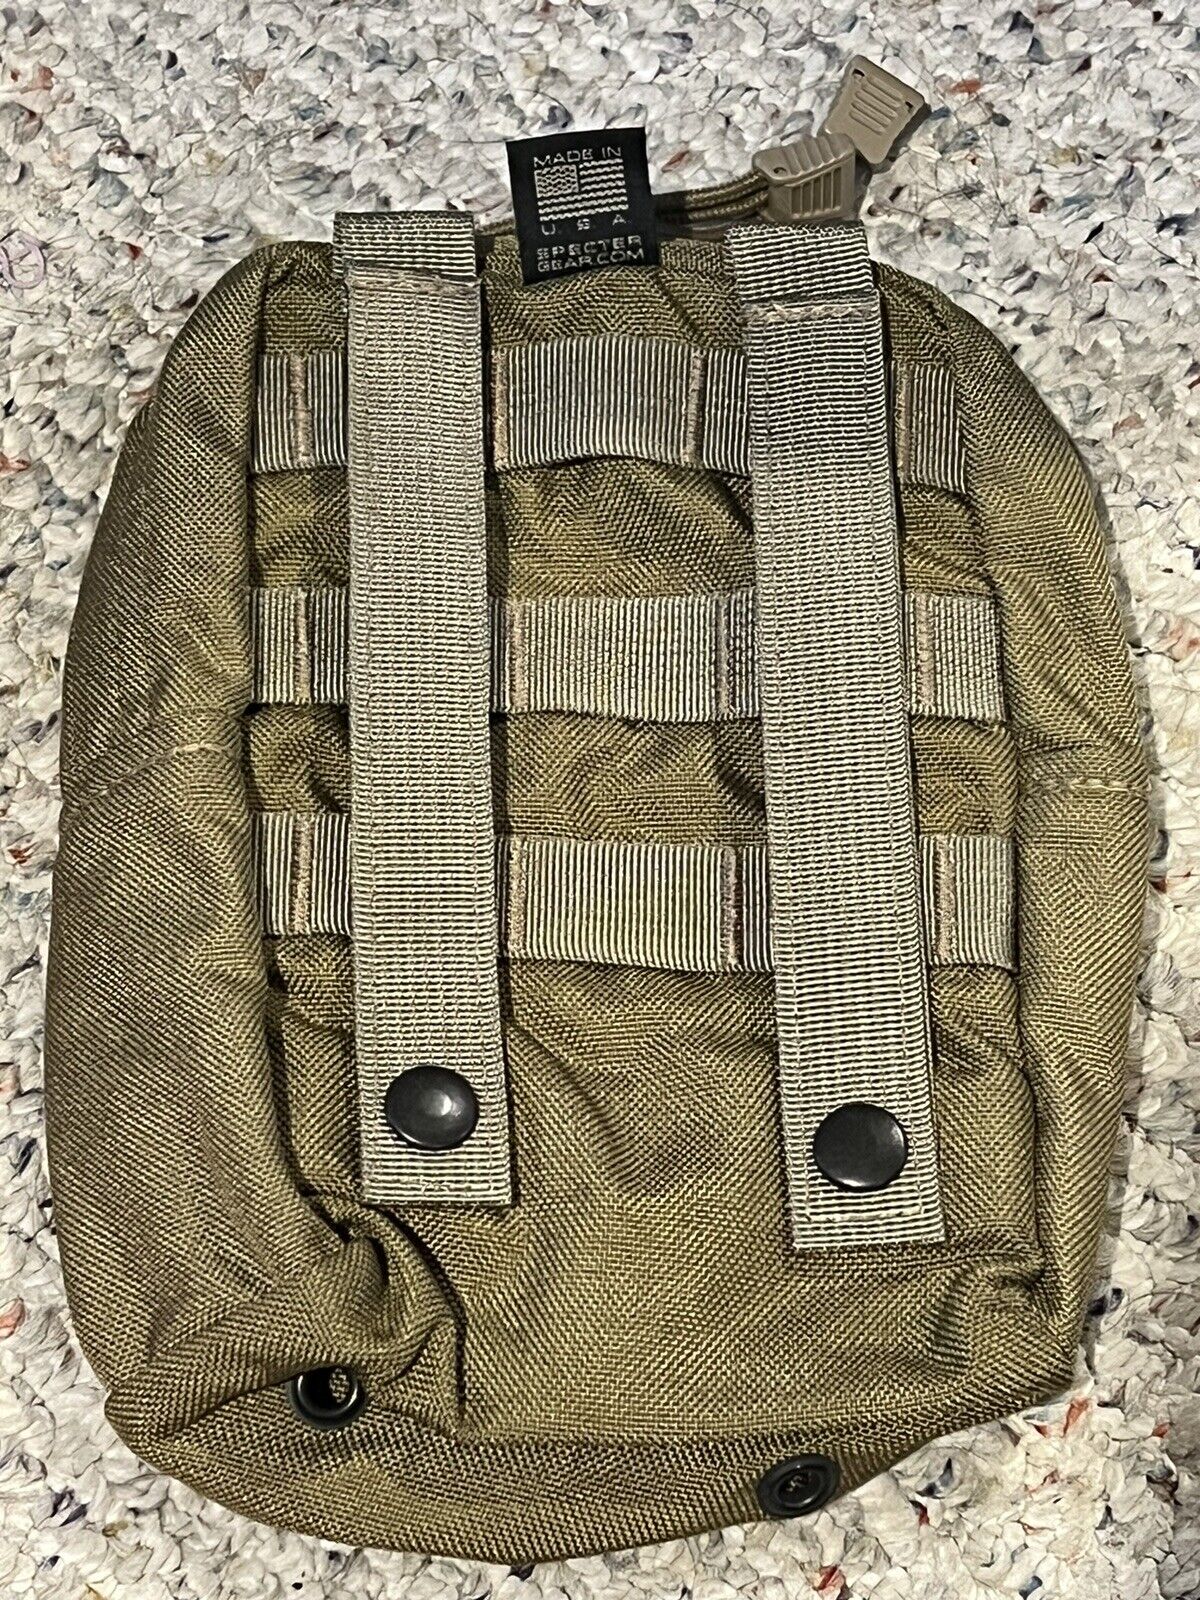 NEW Specter Gear Medium Vertical MOLLE Utility Pouch Color:COYOTE: Made In USA